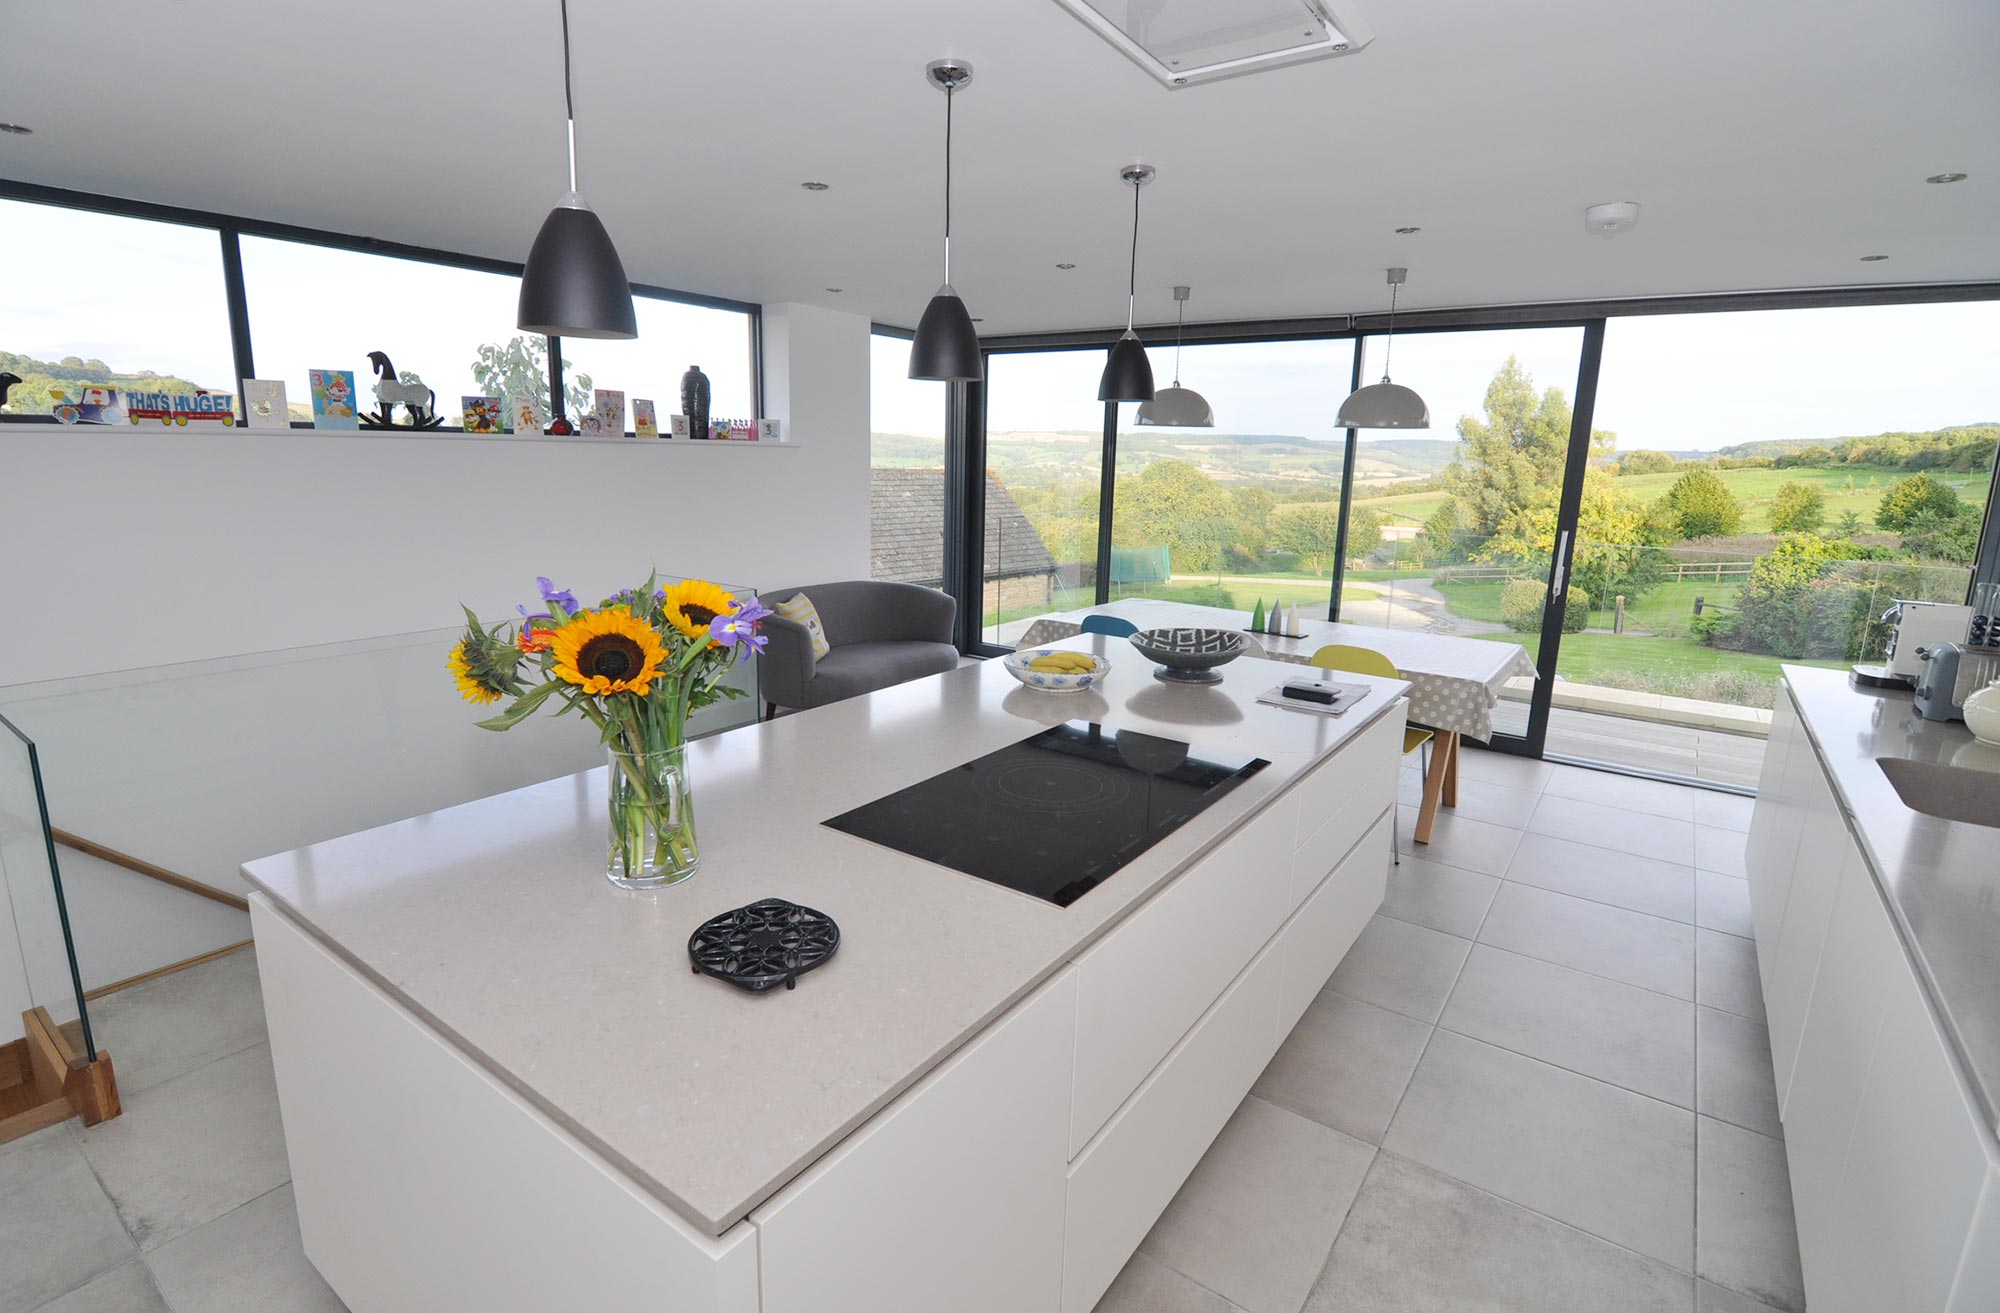 Kitchens Cirencester, Voga Interiors - Cleeve Hill Kitchen Project